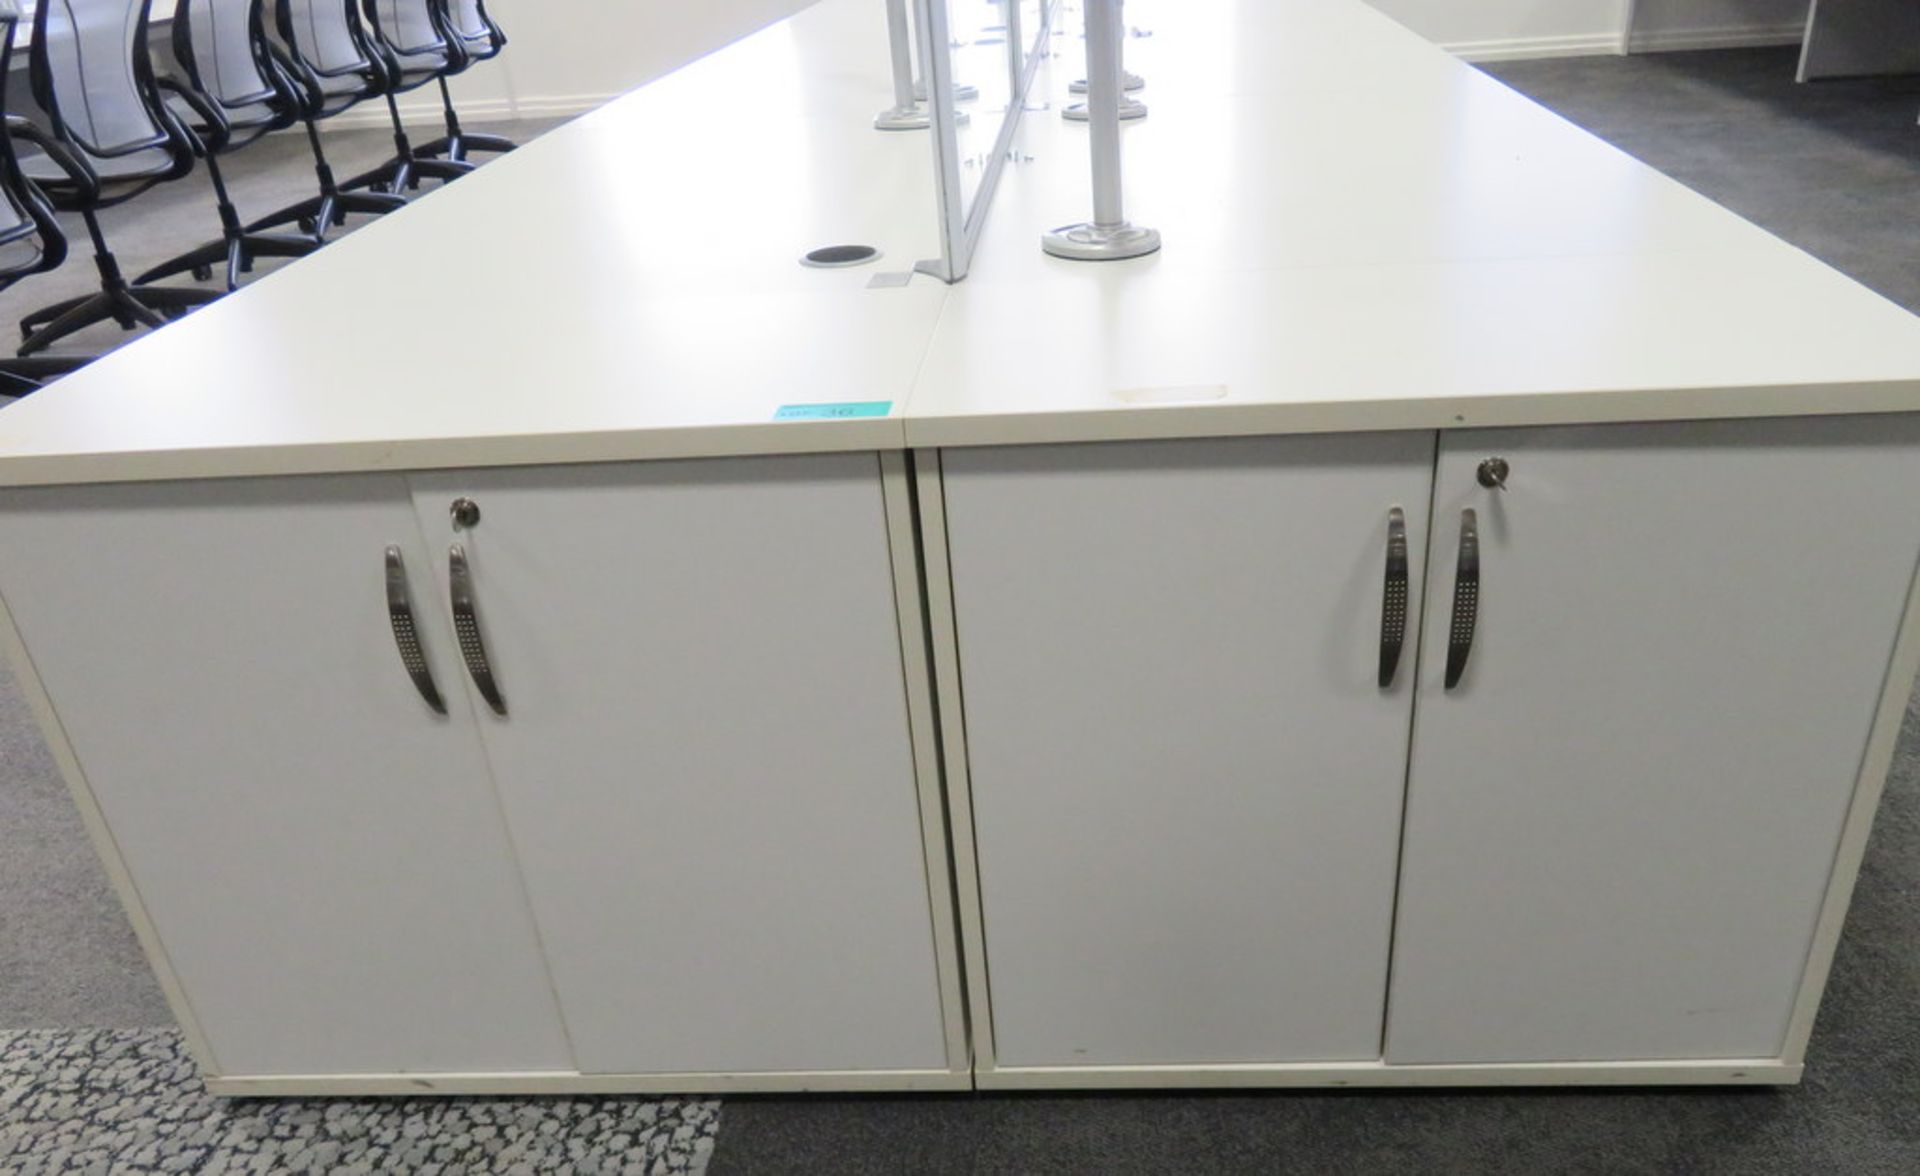 12 Person Desk Arrangement With Dividers, Monitor Arms & Storage Cupboards. - Image 3 of 4